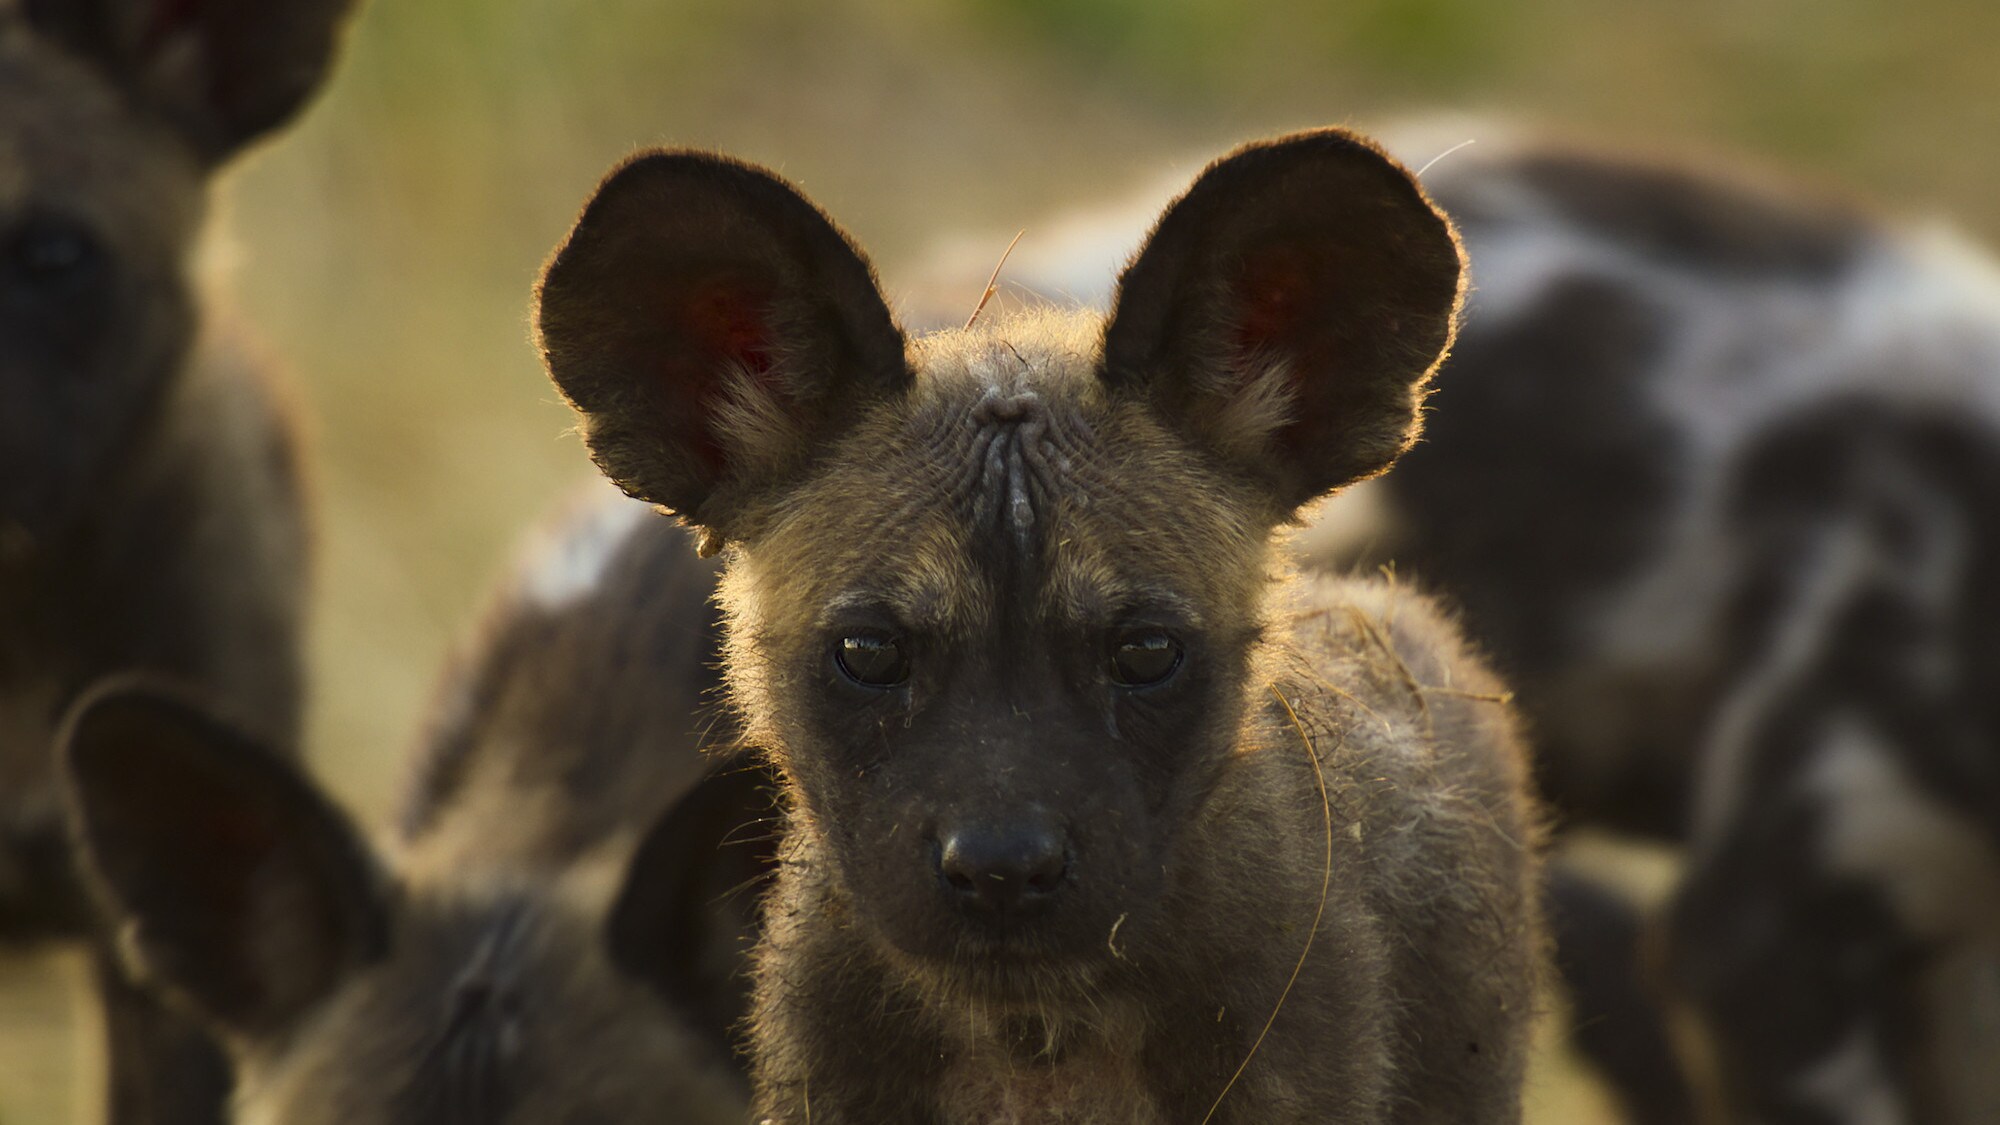 Pup looking at the camera. (National Geographic for Disney+/Bertie Gregory)